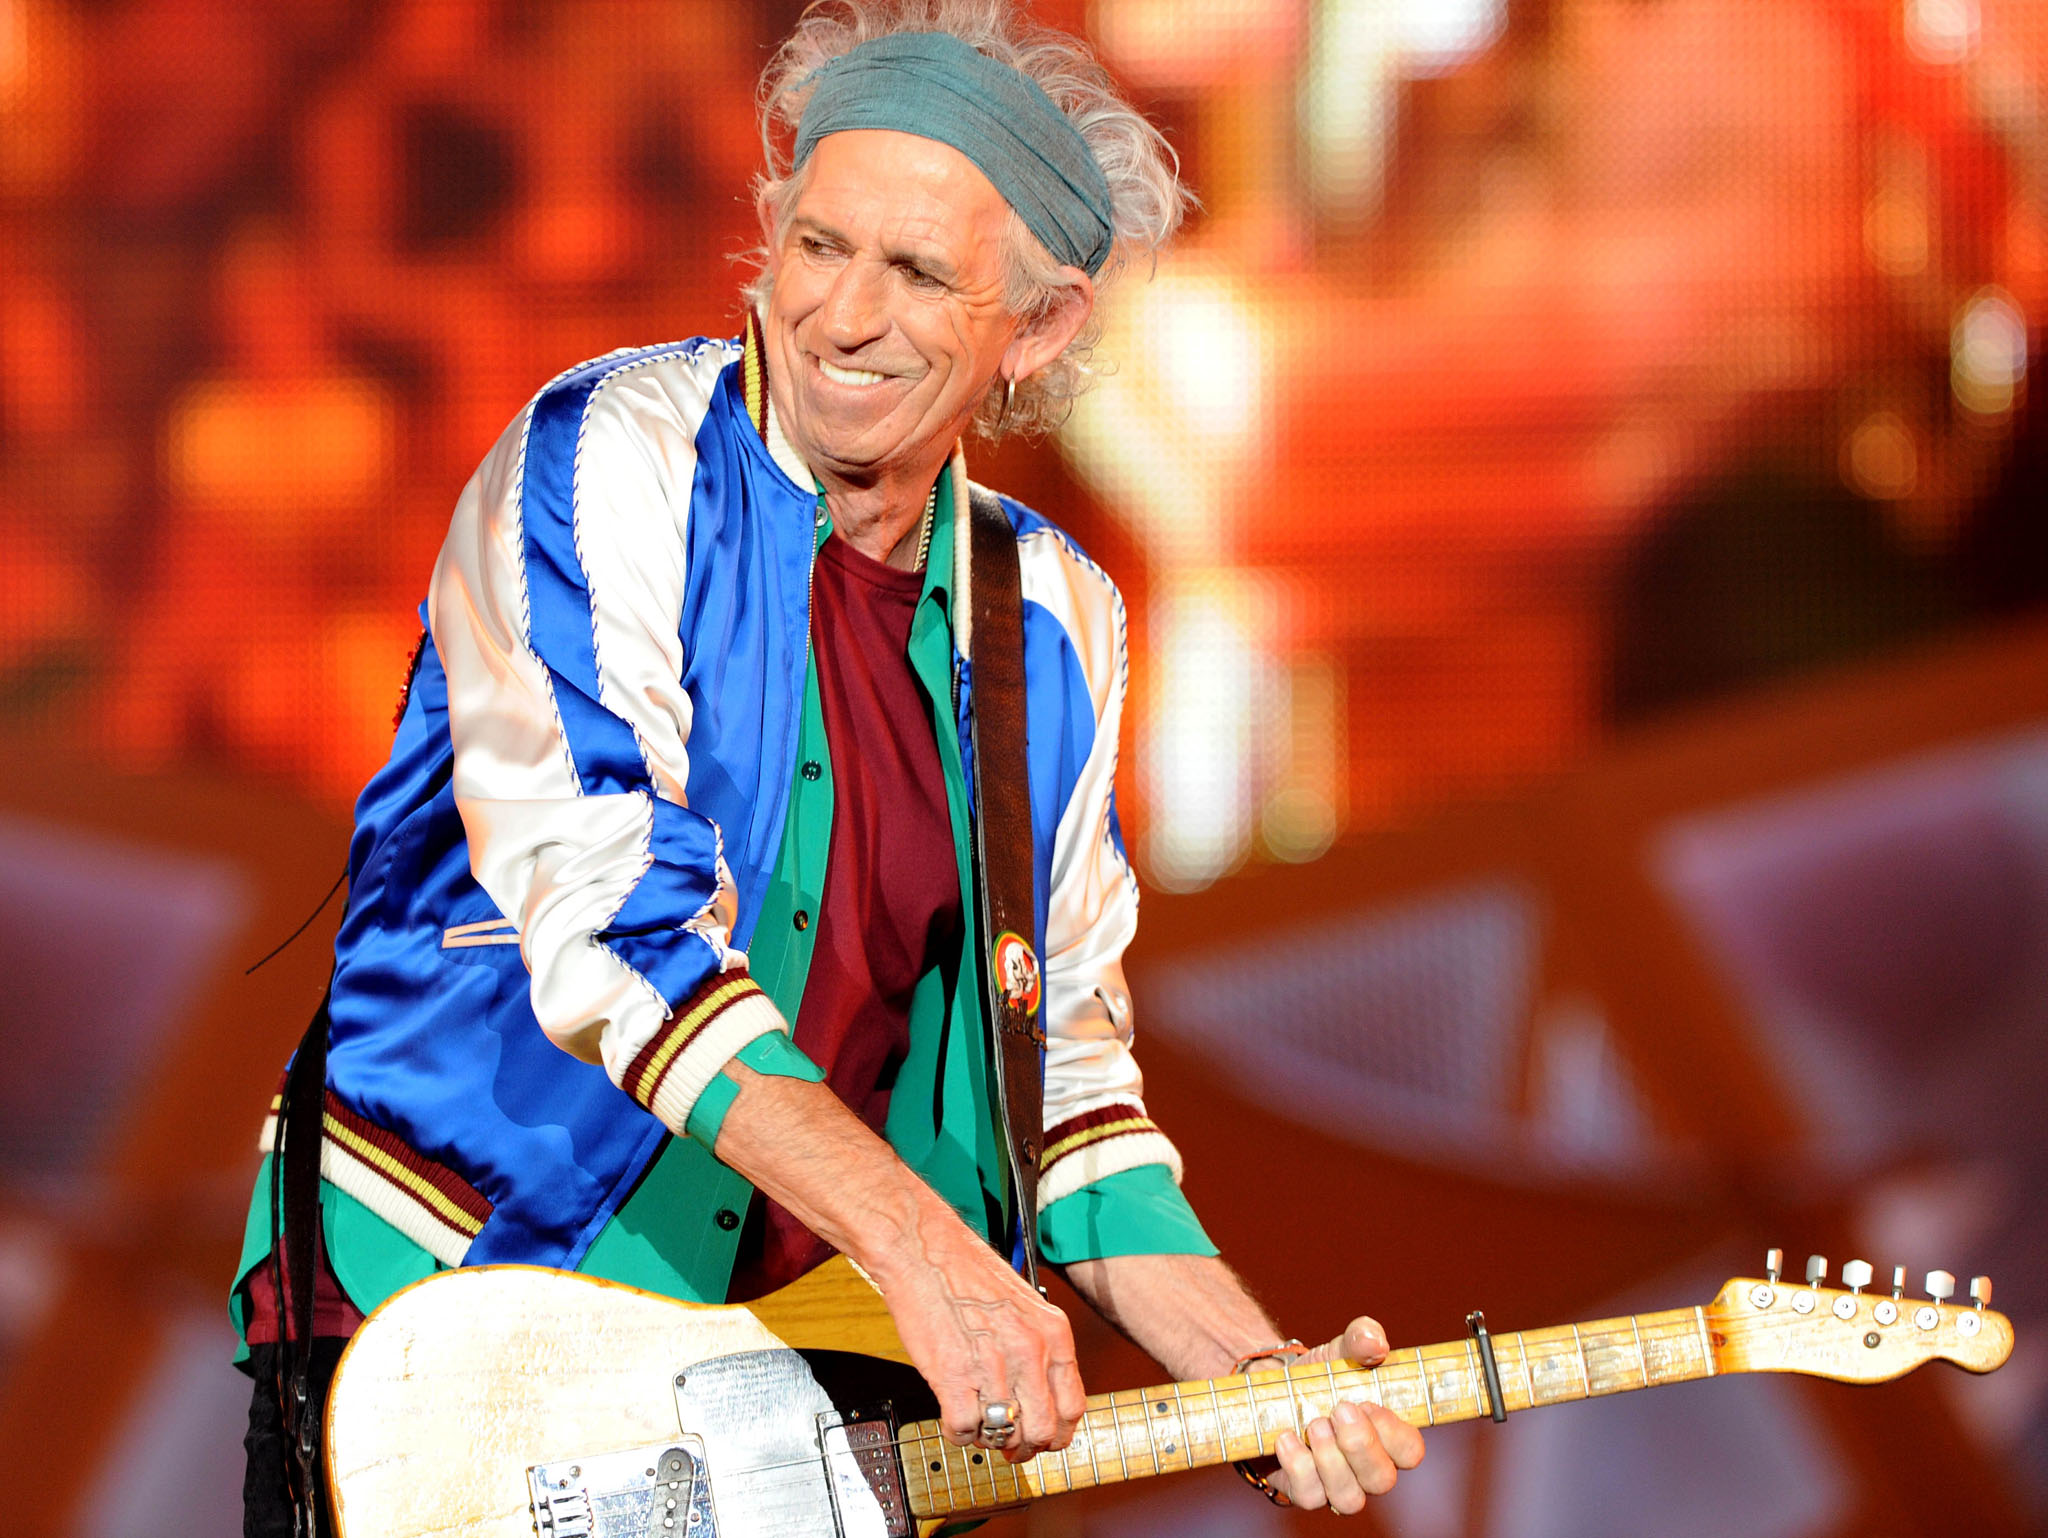 1920x10802019410 Keith Richards The Rolling Stones Guitarist 1920x10802019410 Resolution 0669